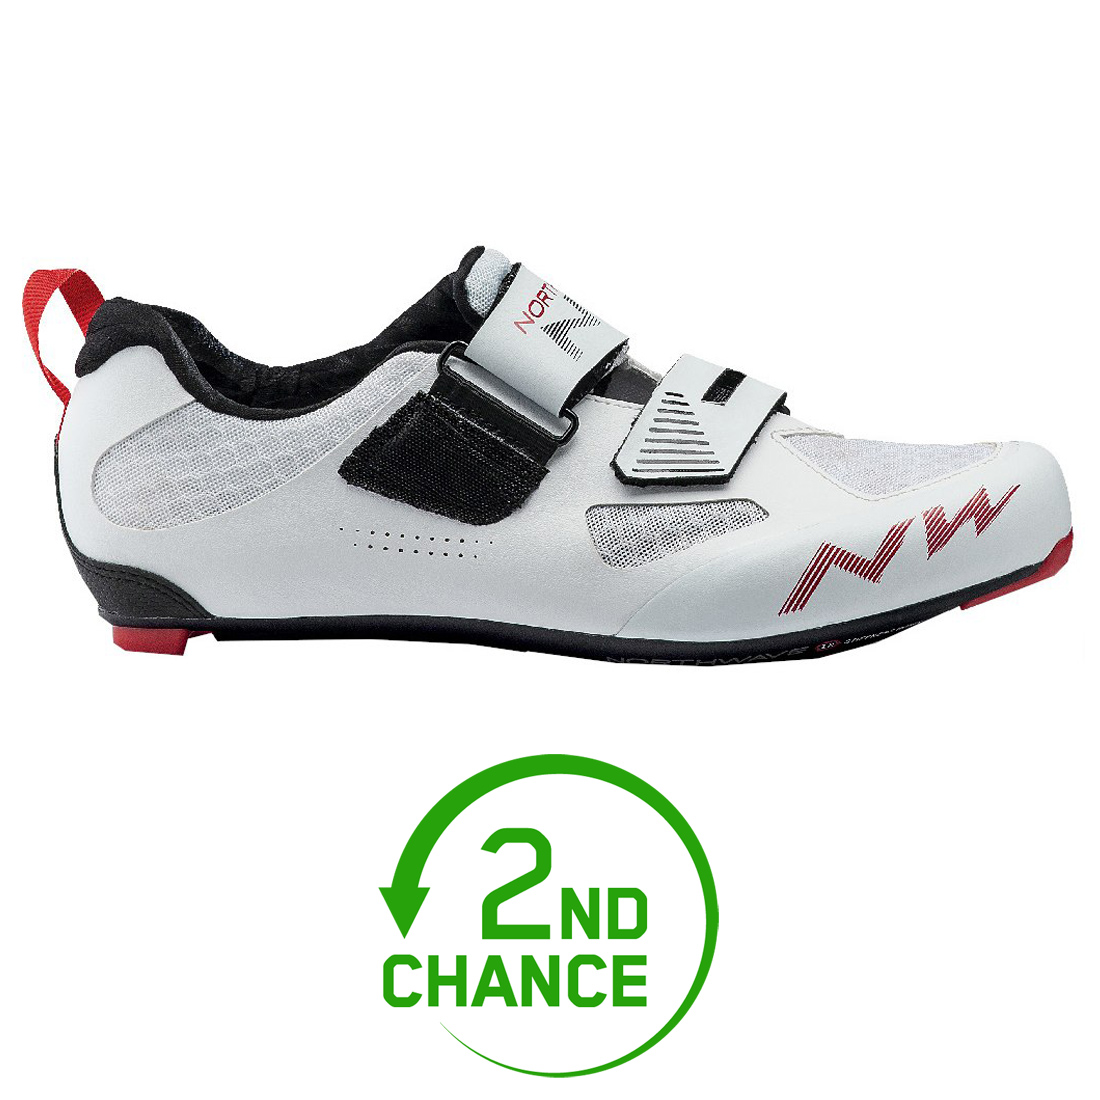 Picture of Northwave Tribute 2 Carbon Triathlon Shoes Men - white 50 - 2nd Choice